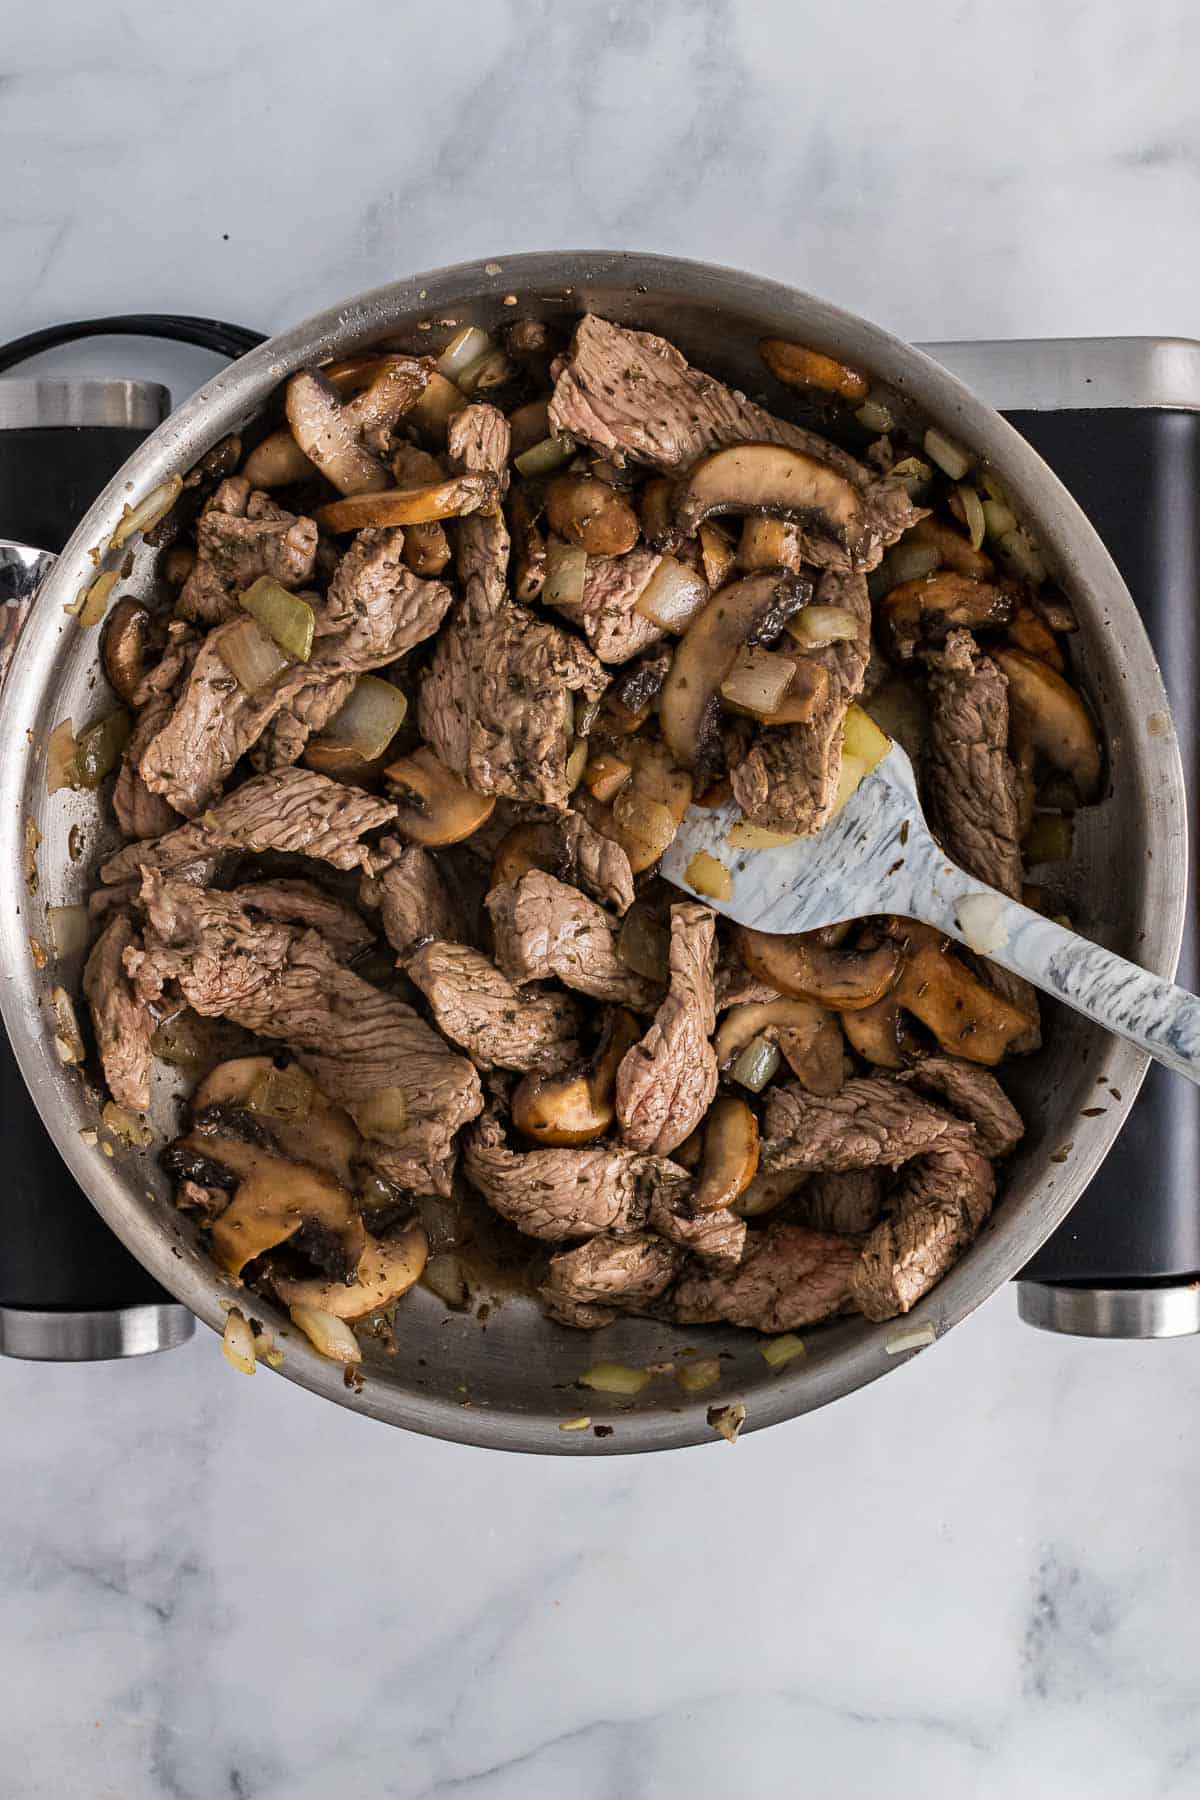 Cooked steak mixed in with the mushroom and onion mixture in the pan, as seen from above